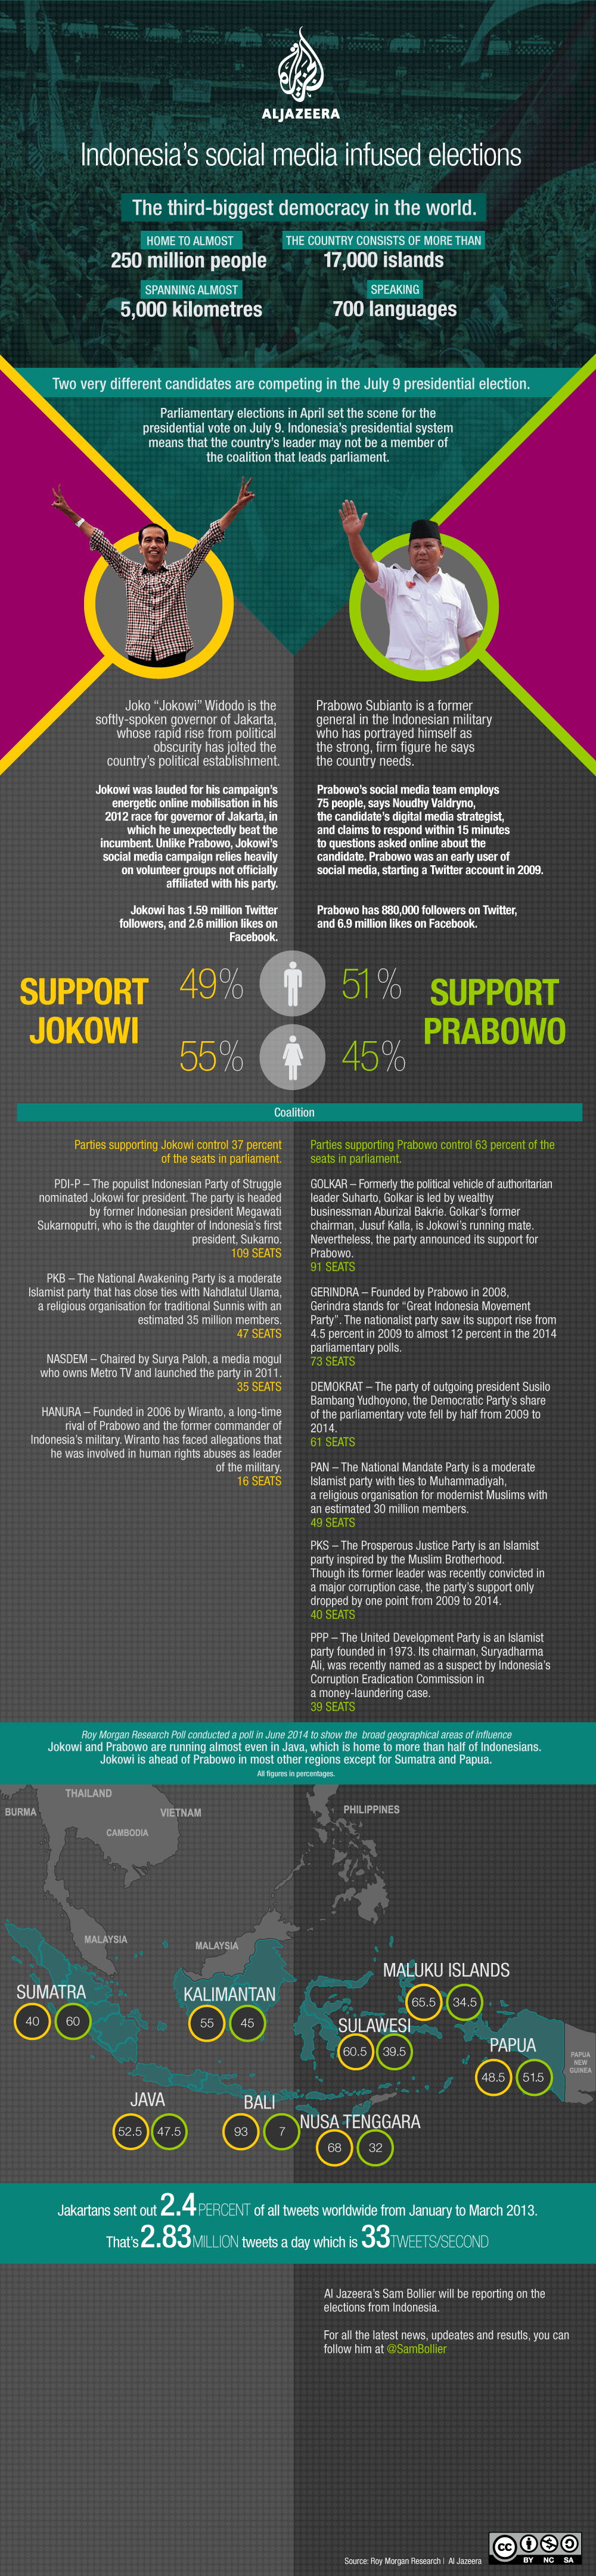 Infographic: Indonesia Elections